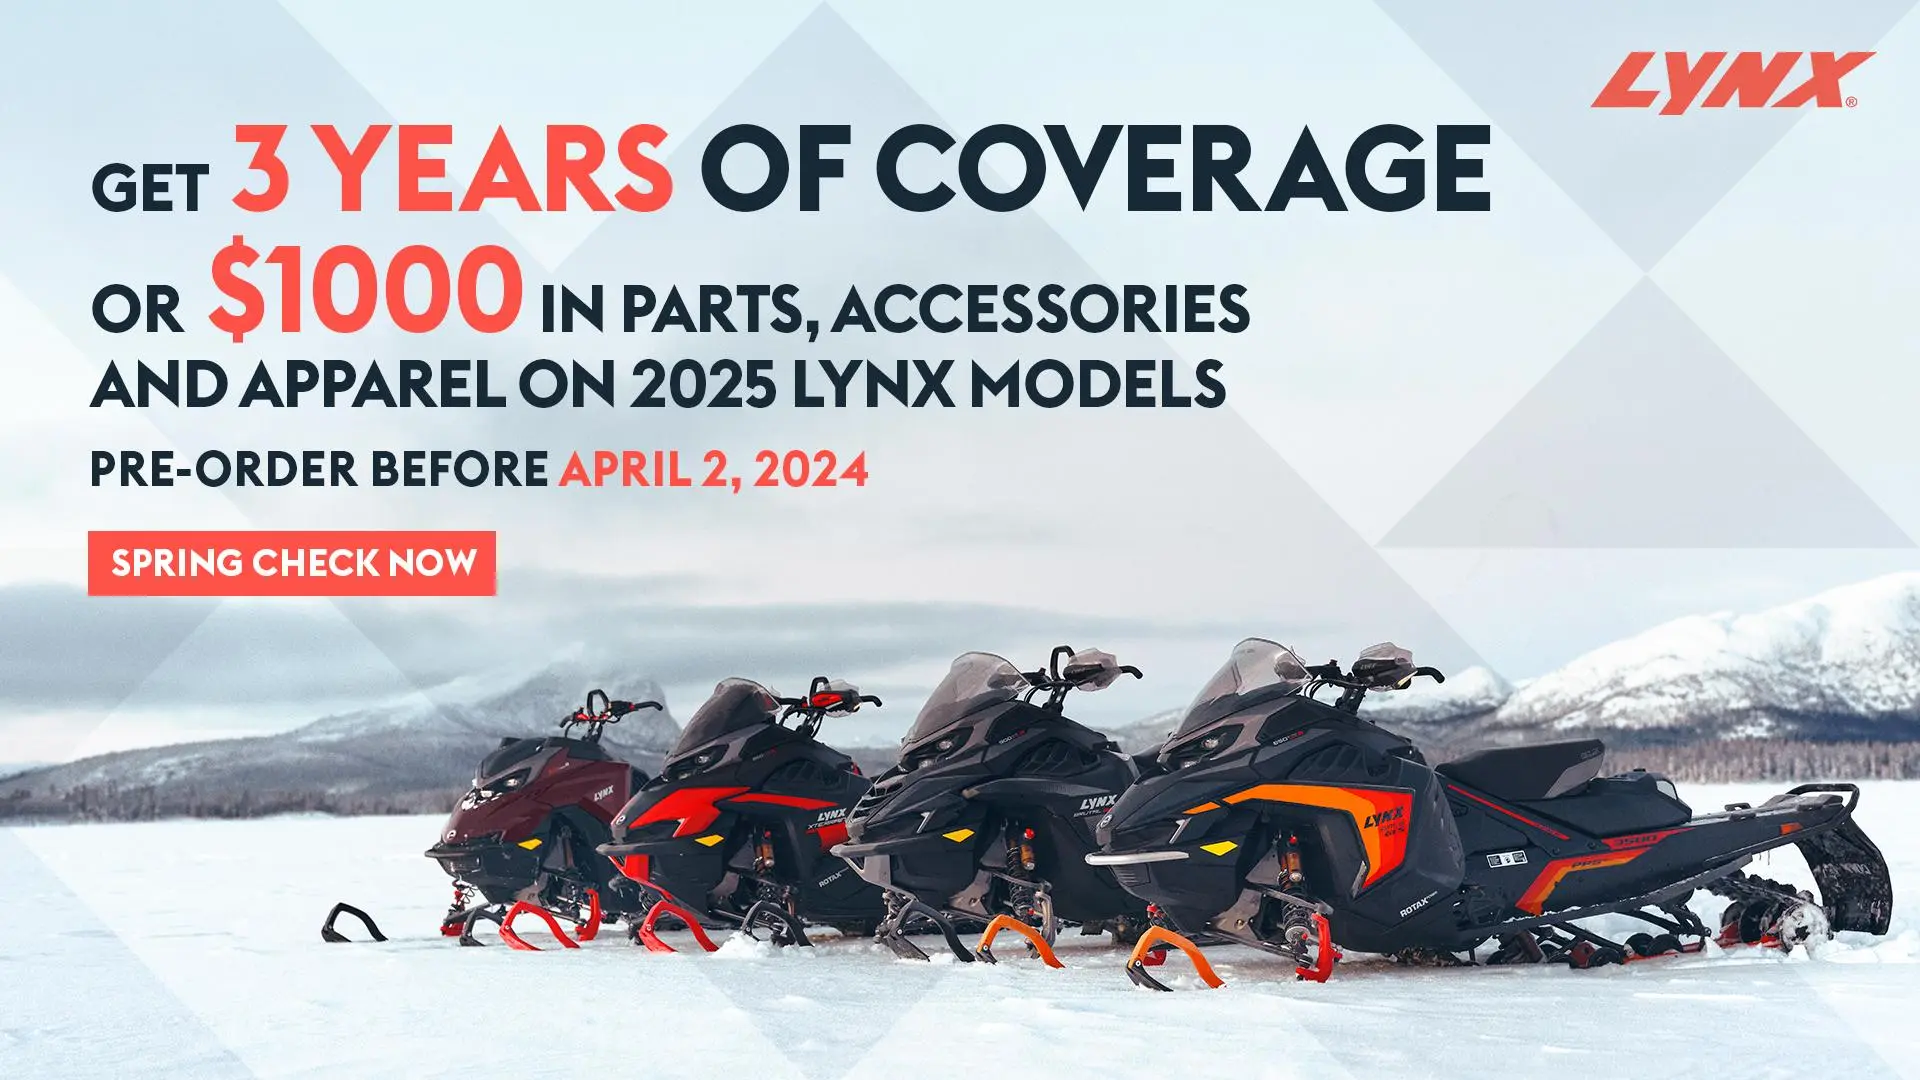 Get 3 years of coverage or $1,000 in parts, accessories & apparel on select 2025 Lynx models